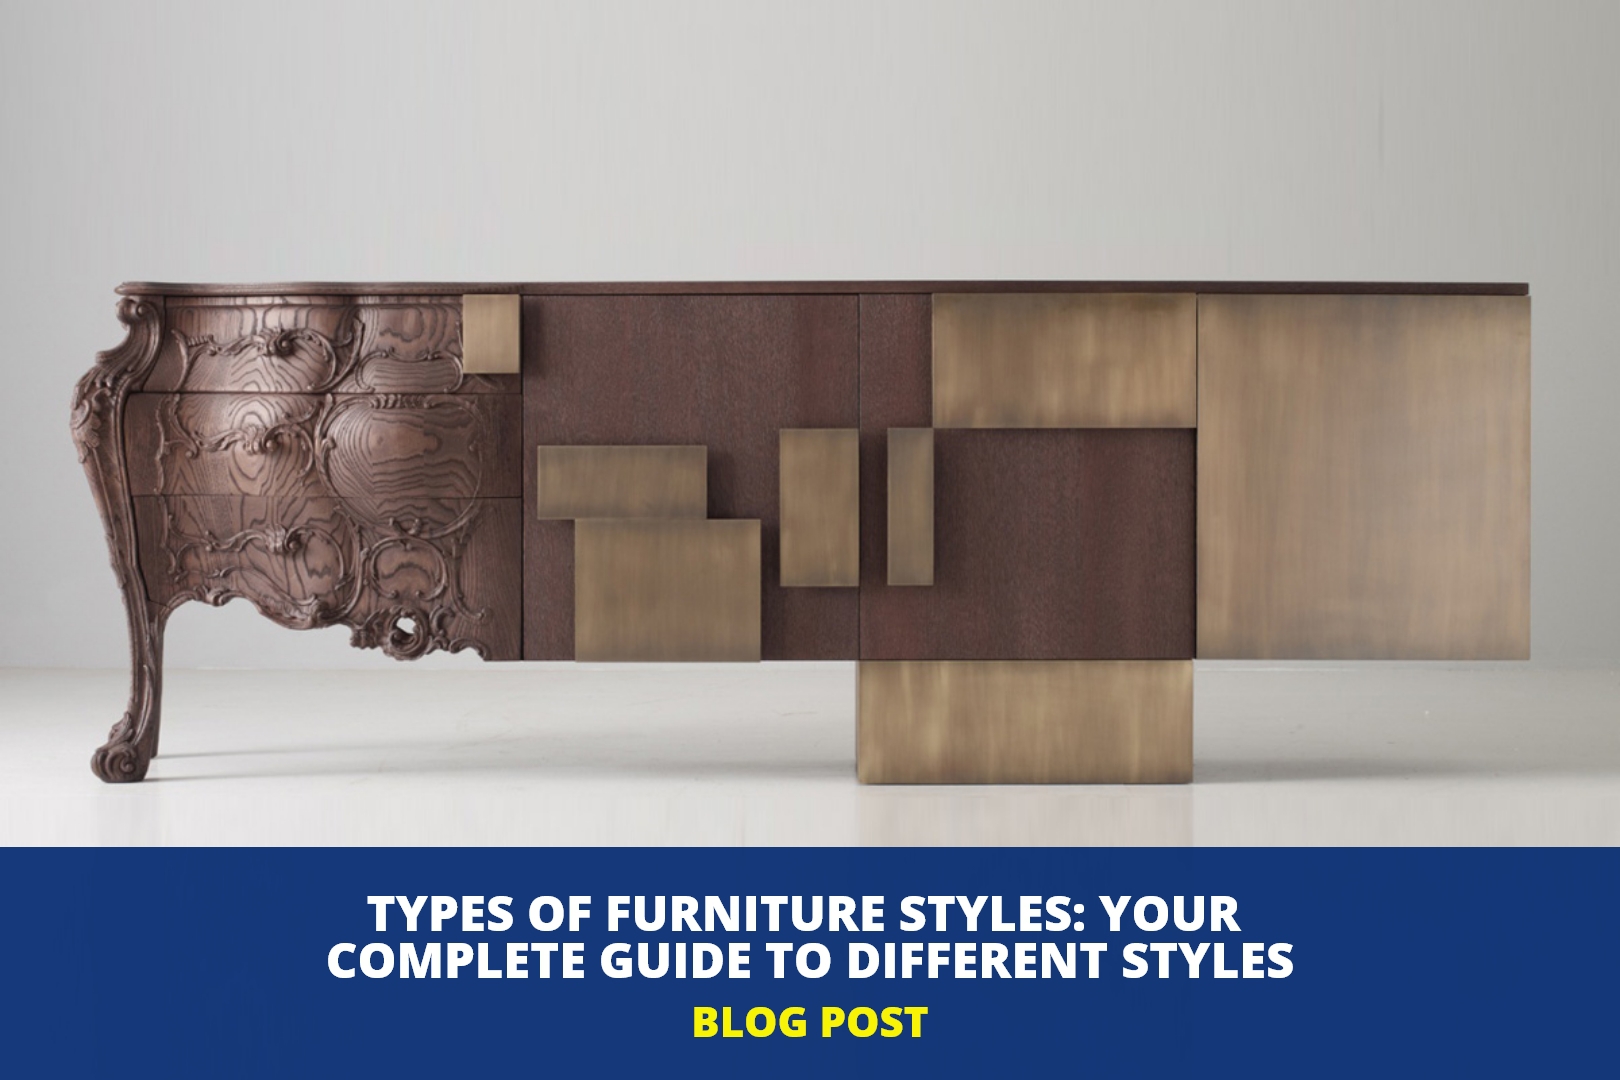 Types of Furniture Styles: Your Complete Guide to Different Styles